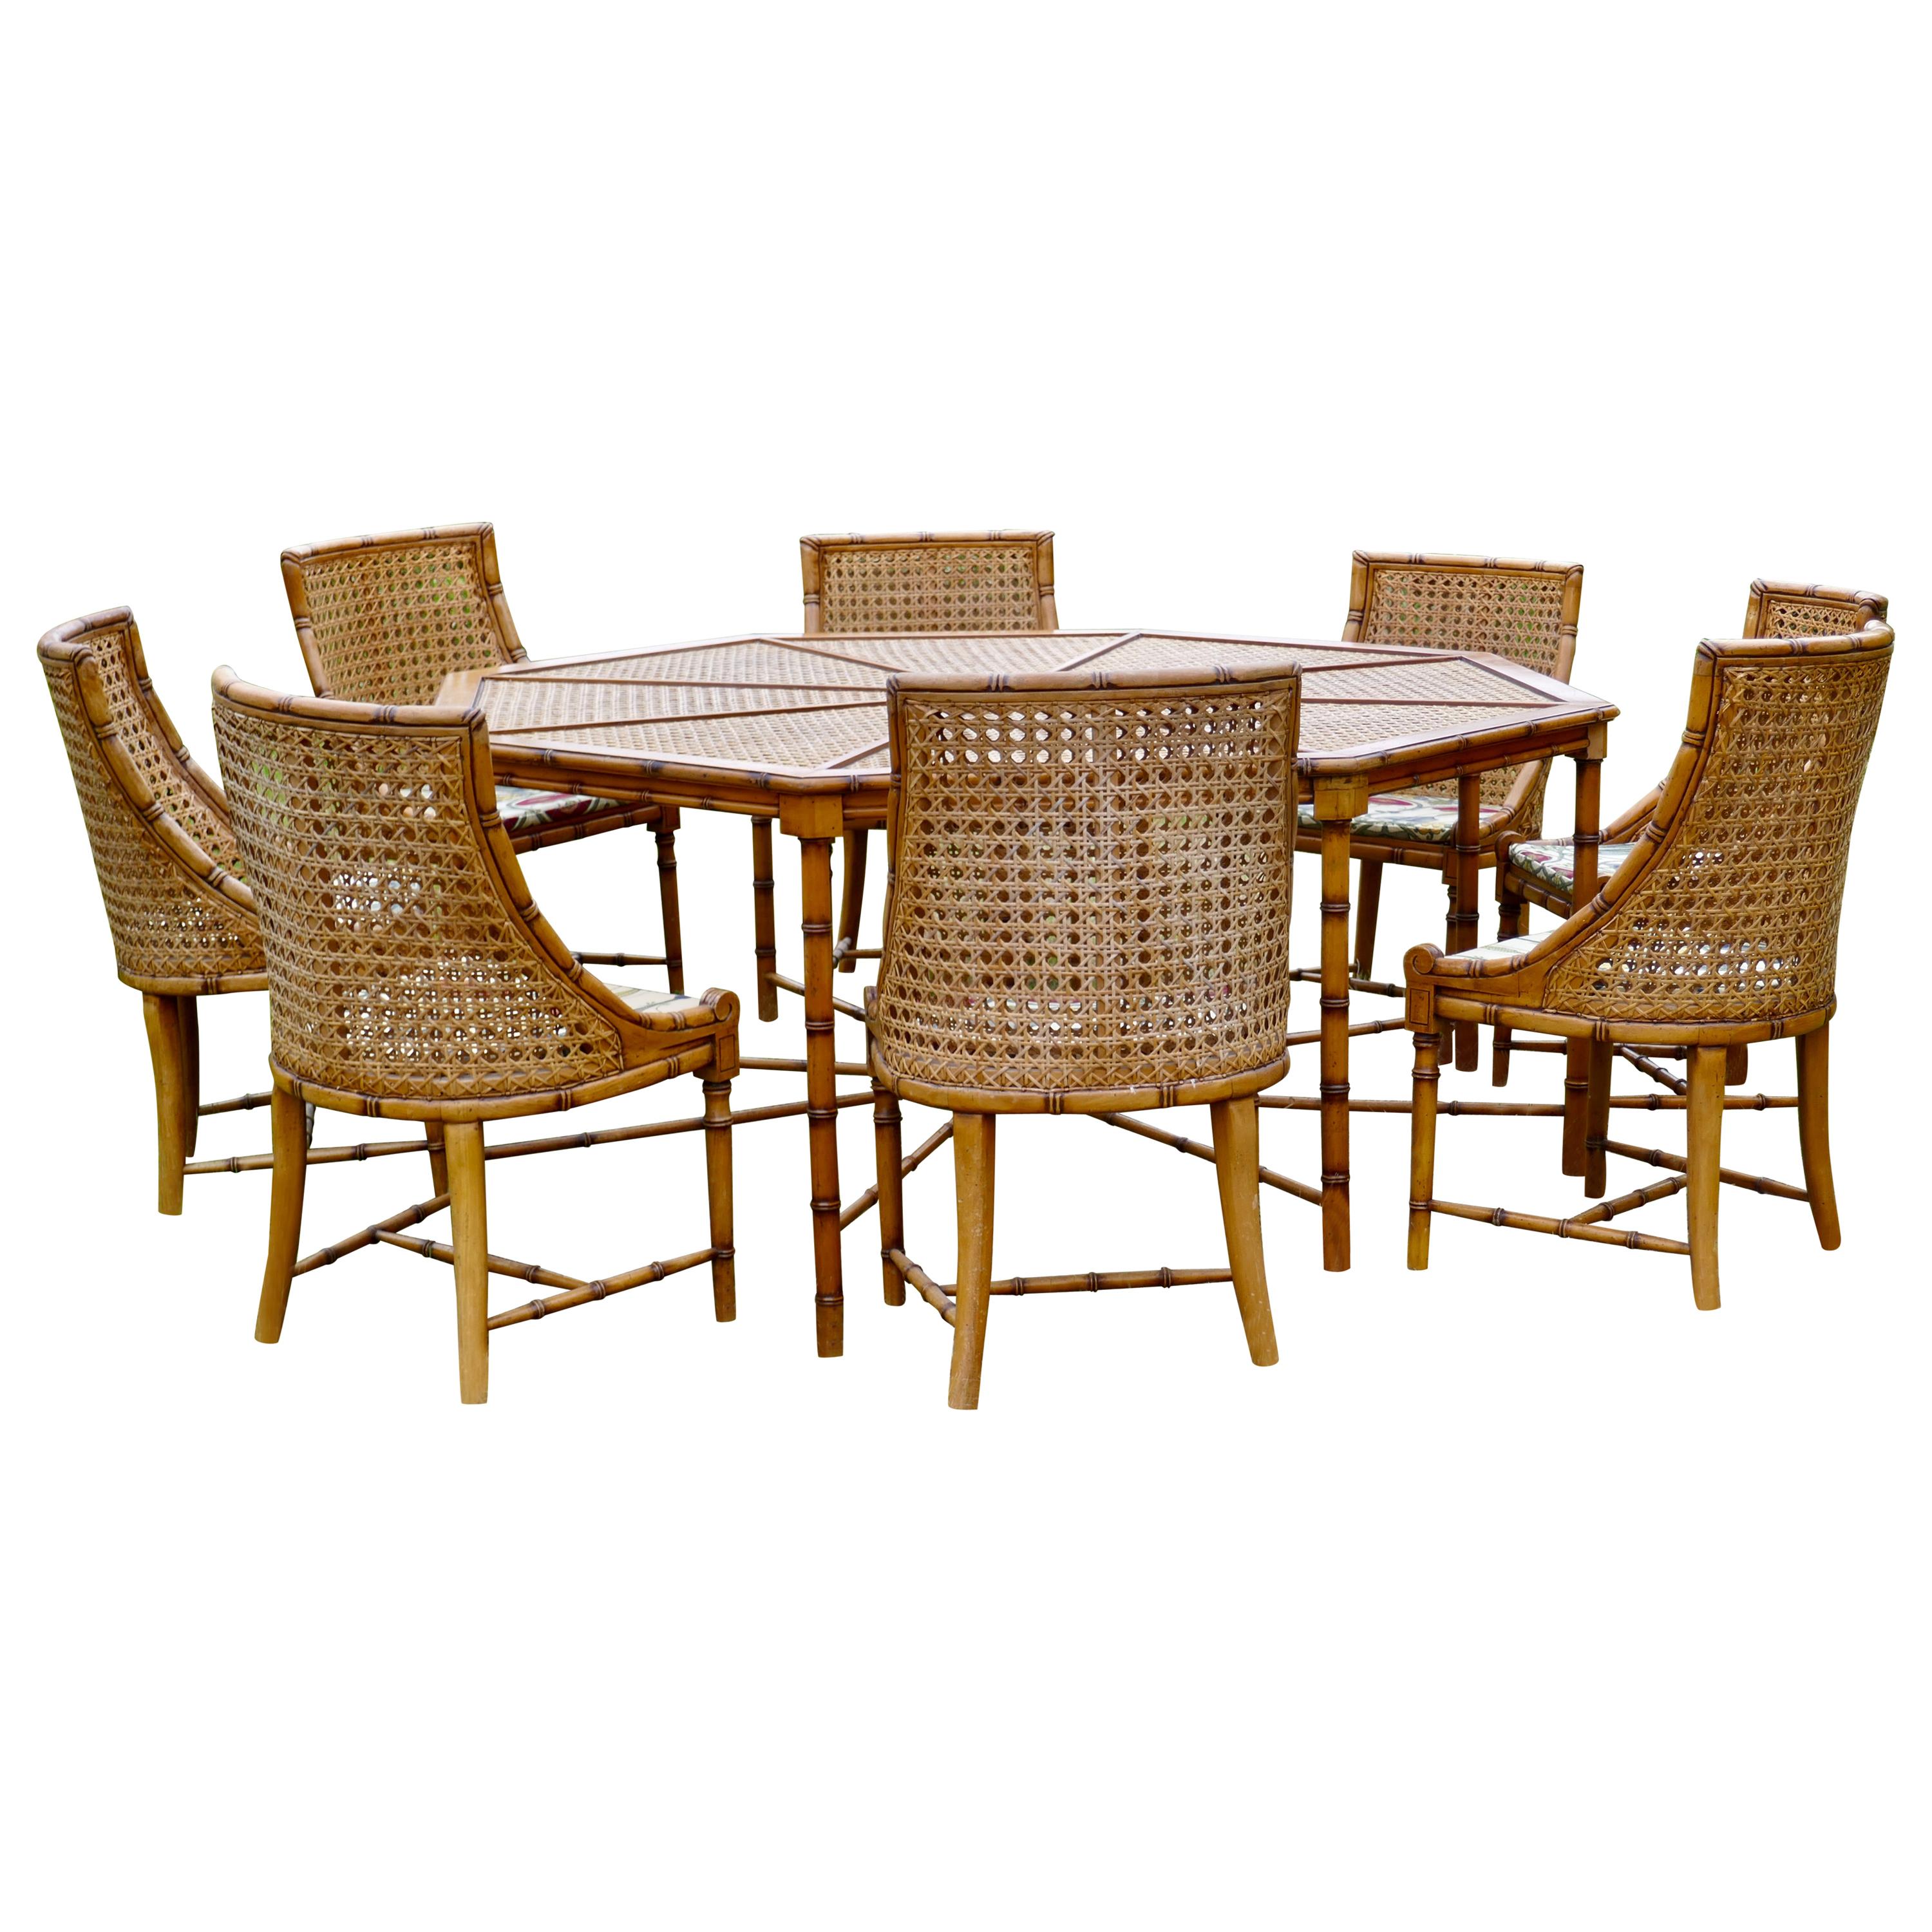 Regency Style Simulated Bamboo and Bergèr Set of 8 Chairs and Octagonal Table